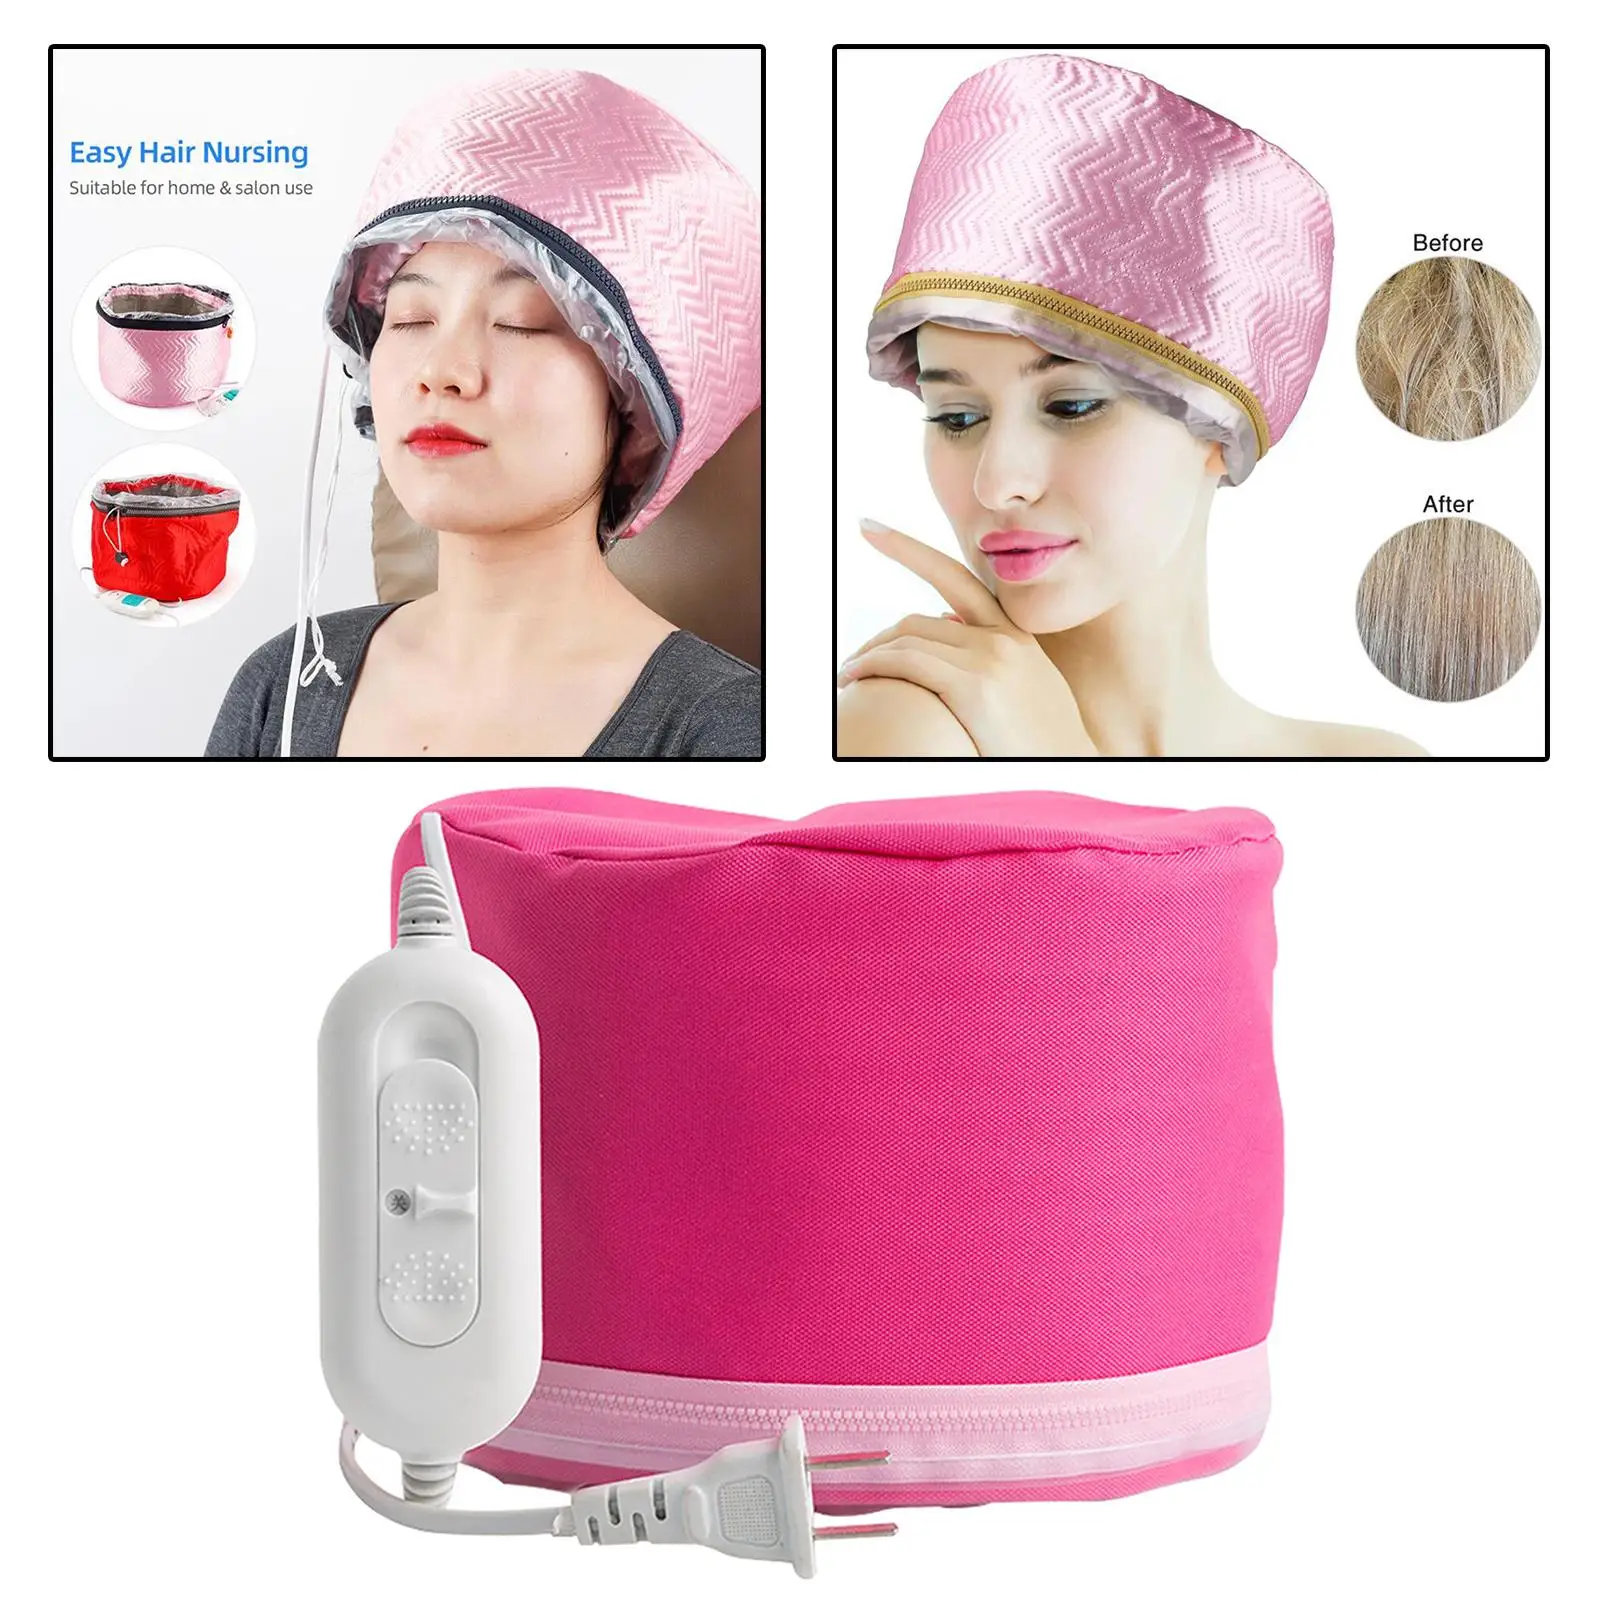 Hair Heating Caps Steamer 3-Mode Adjustable Size Safe Essential Oil Caps for Deep Conditioning Home Salon Hair SPA Women Men